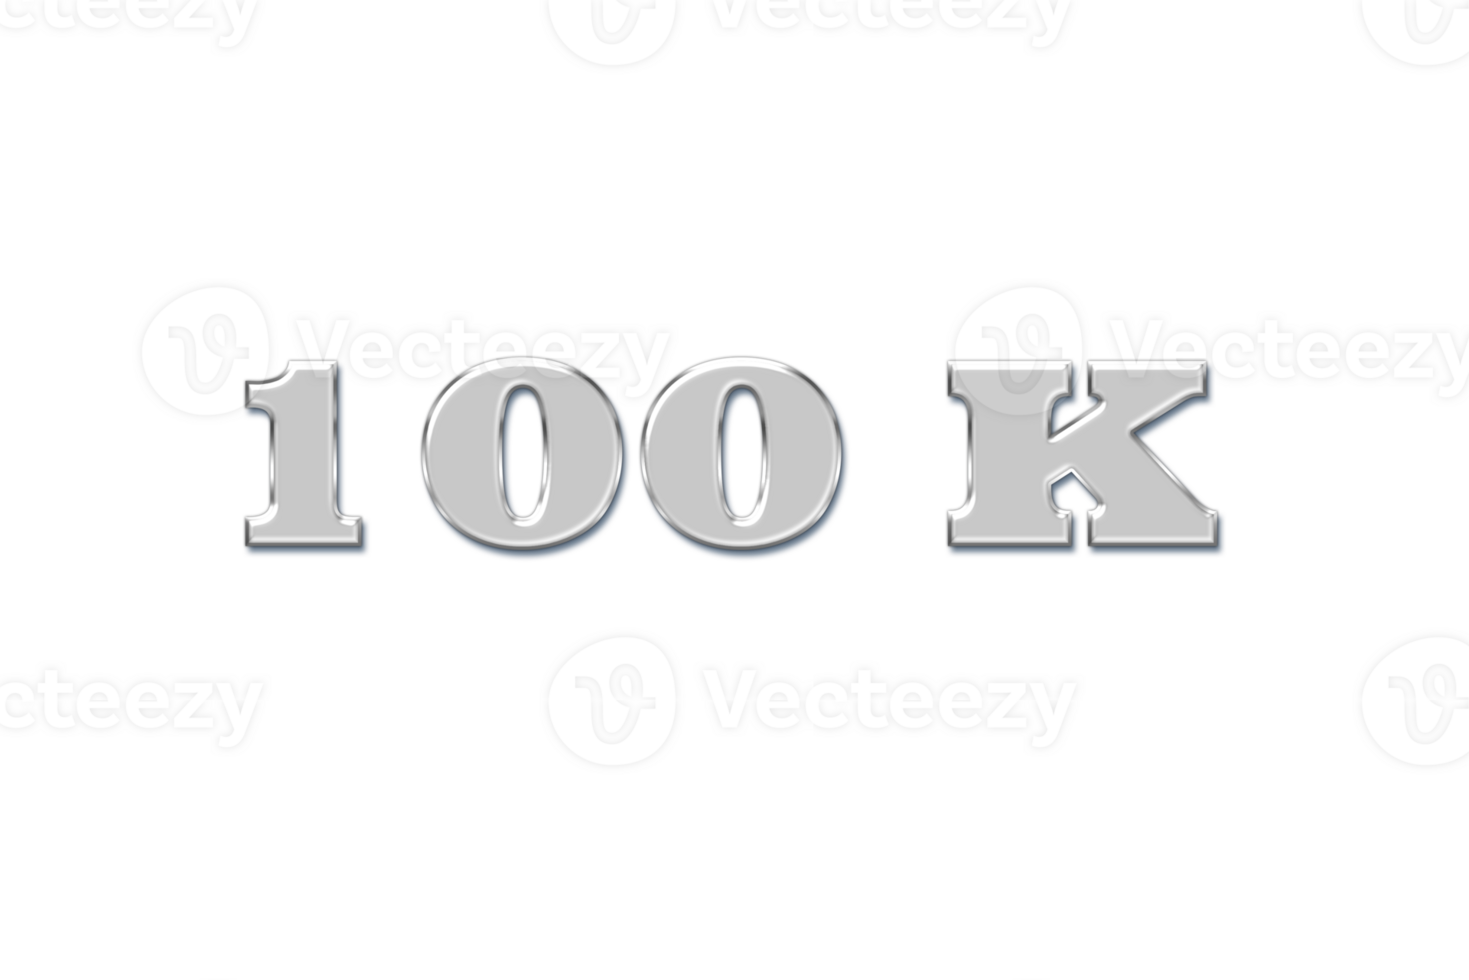 100 k subscribers celebration greeting Number with glass design png